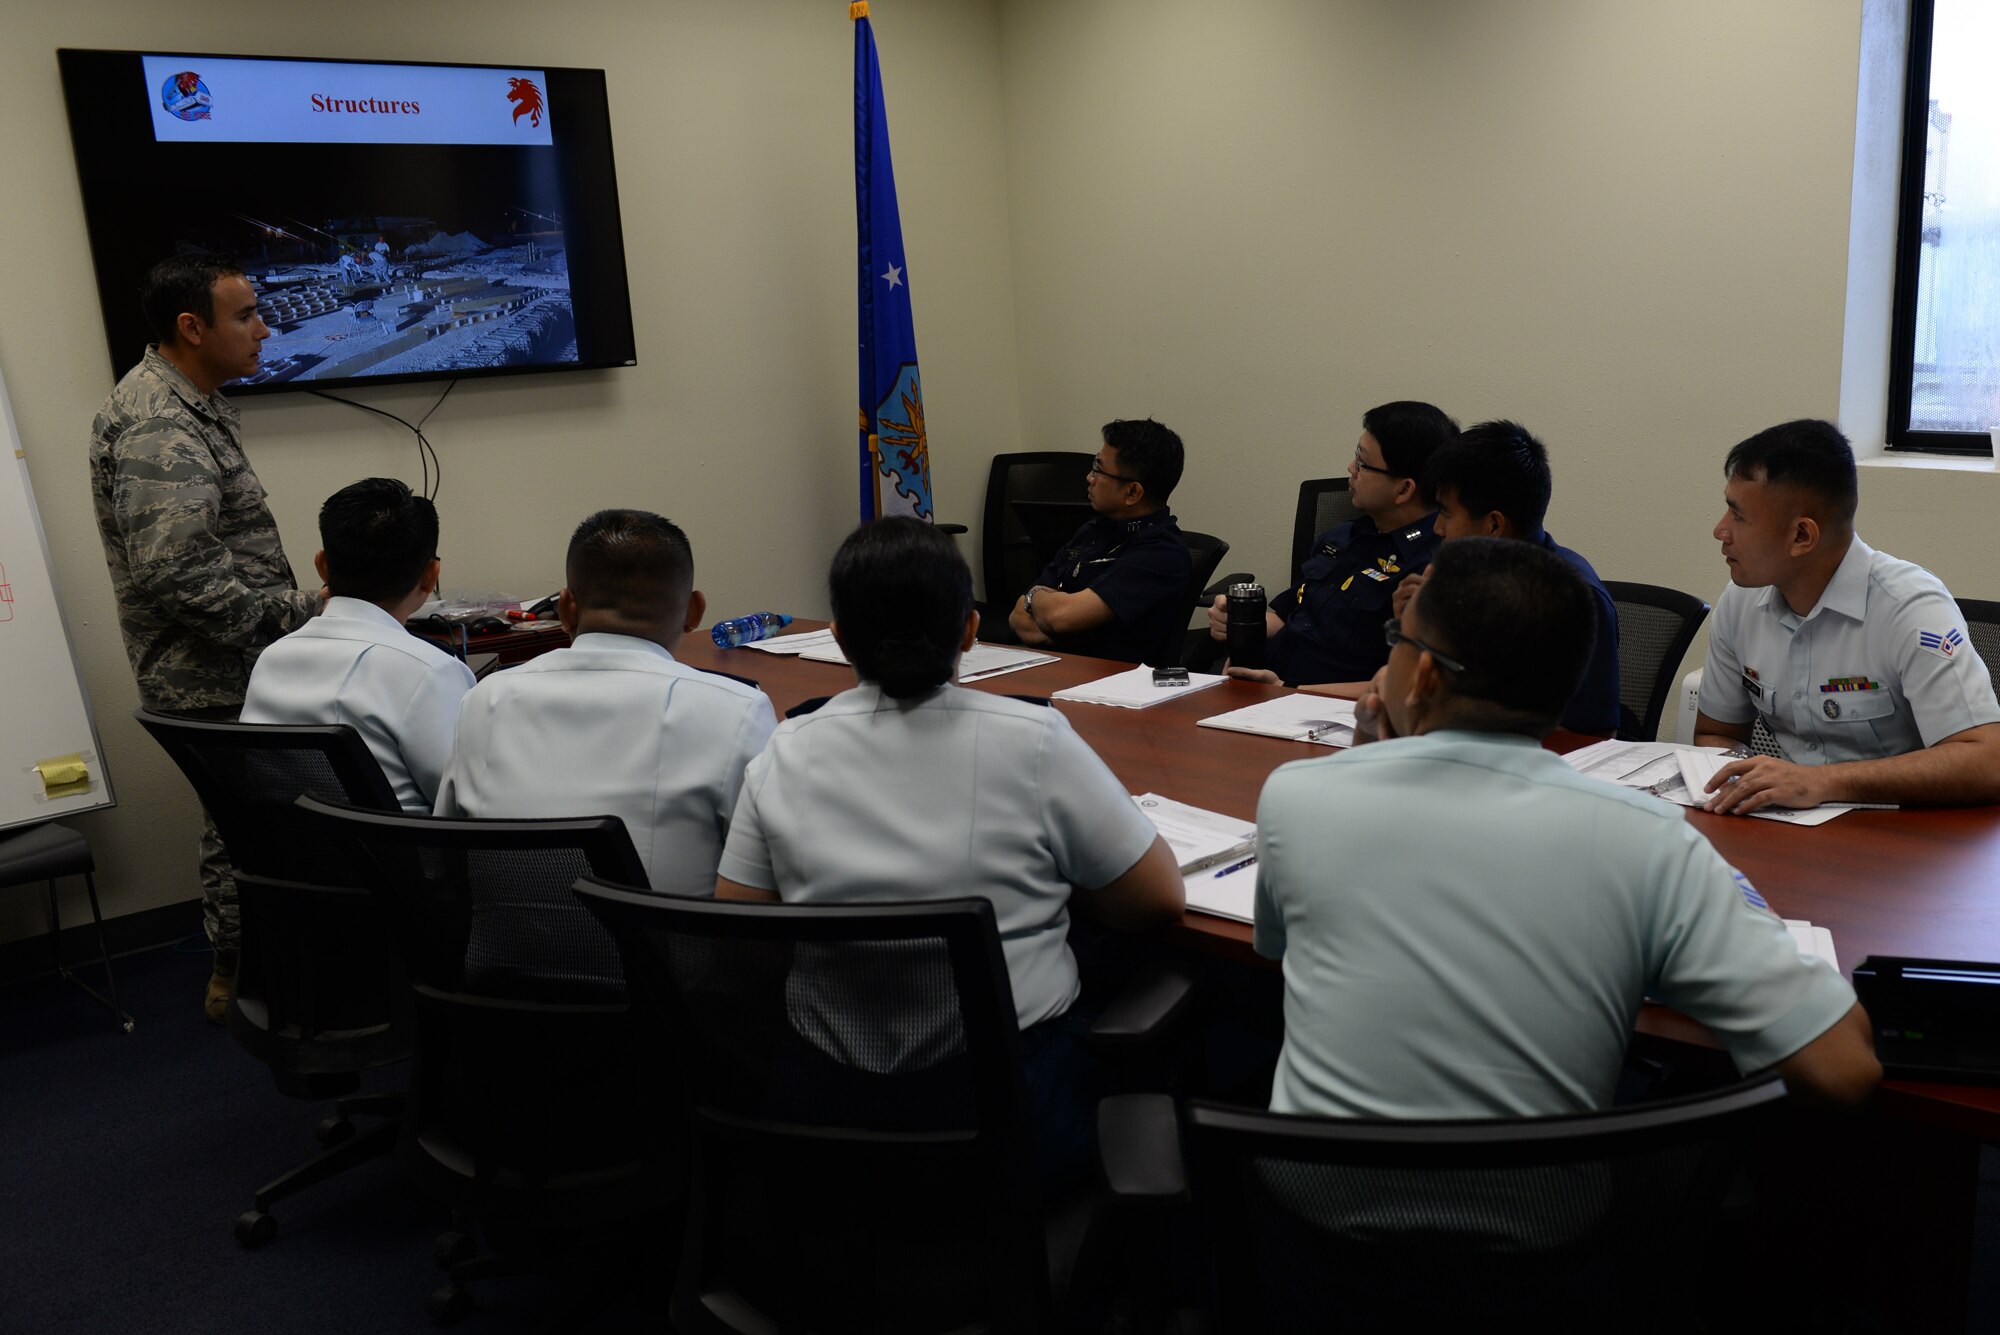 Capt. Naseem Ghandour, 554th RED HORSE Squadron civil engineer, facilitates a discussion with delegates of the Philippine Air Force and Royal Thai Air Force during the Pacific Unity multilateral tilt-up construction workshop May 10, 2016, at Andersen Air Force Base, Guam. Pacific Unity engagements facilitate the building of military partnerships, building capacity, and increasing interoperability among the U.S. Air Force and participating nations. Structures built with the tilt-up construction method are resistant to natural disasters such as typhoons, which are prevalent throughout the Indo-Asia-Pacific region. (U.S. Air Force photo by Airman 1st Class Jacob Skovo)